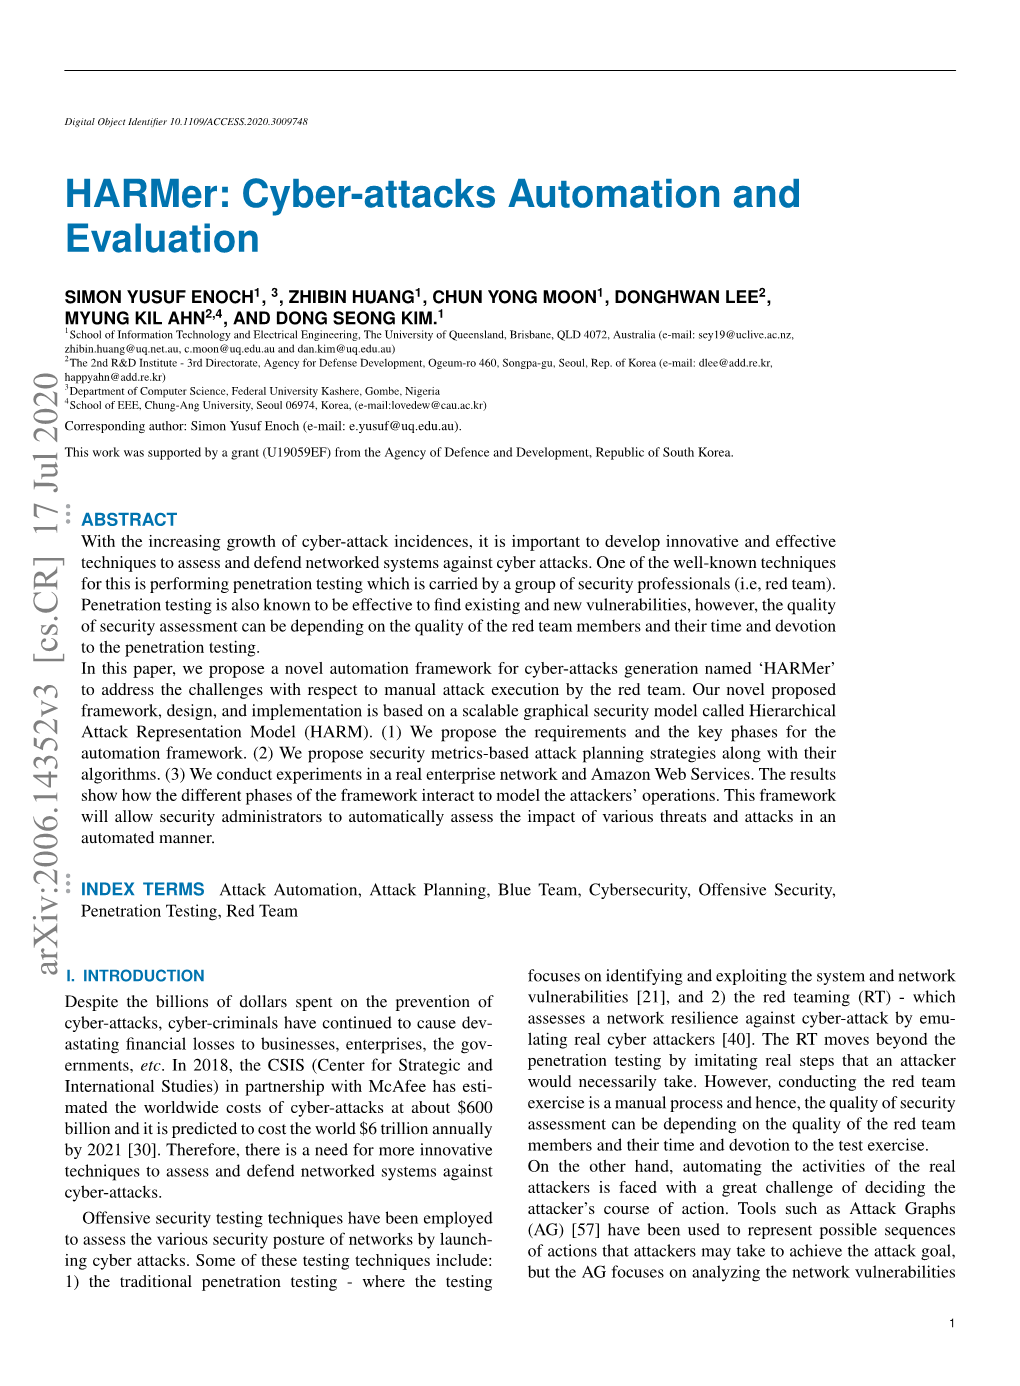 Cyber-Attacks Automation and Evaluation